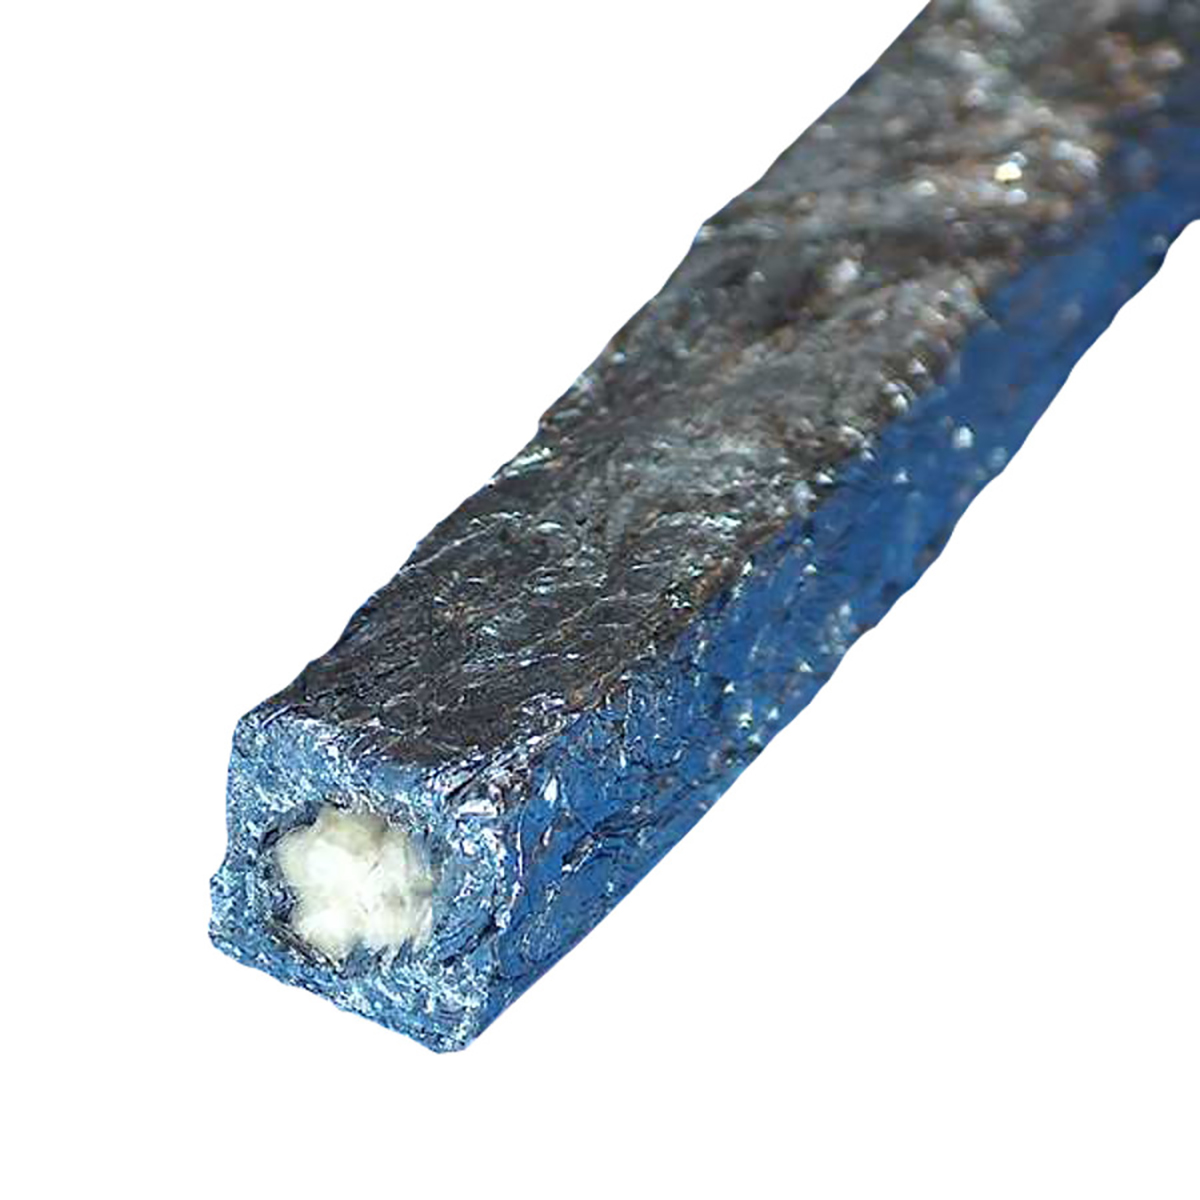 Made from aluminium foil and graphite flake over a fibreglass core, Marigold 8011 Packing exhibits very good strength and excellent compression.